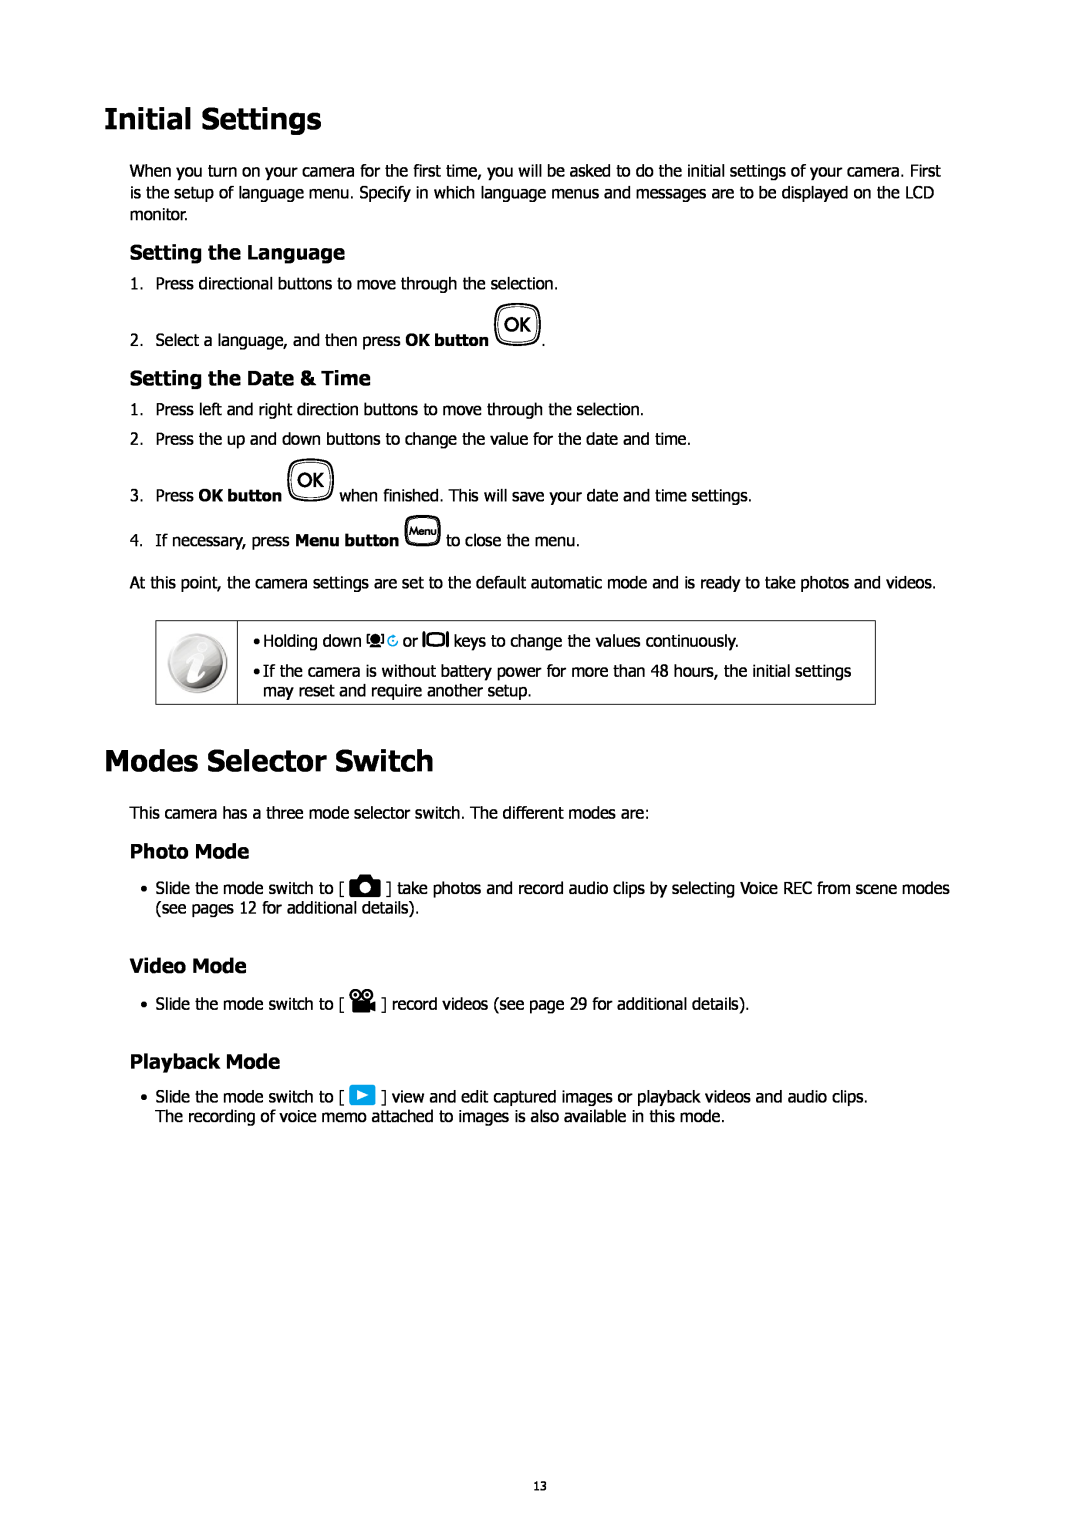 HP SW450 Initial Settings, Modes Selector Switch, Setting the Language, Setting the Date & Time, Photo Mode, Video Mode 